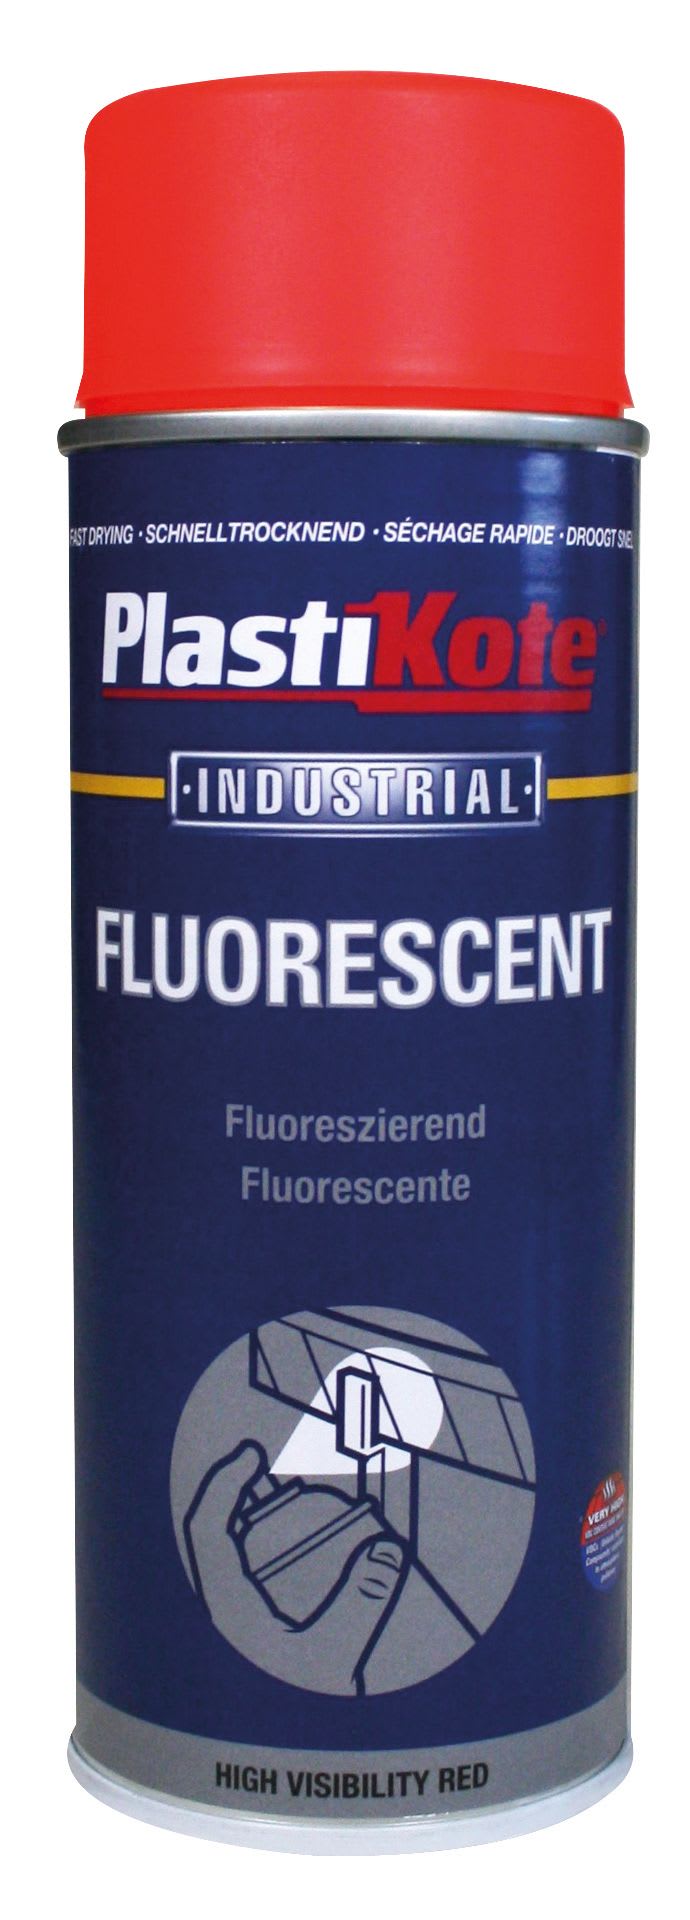 Plastikote Industrial Fluorescent Spray Paint - High Visibility